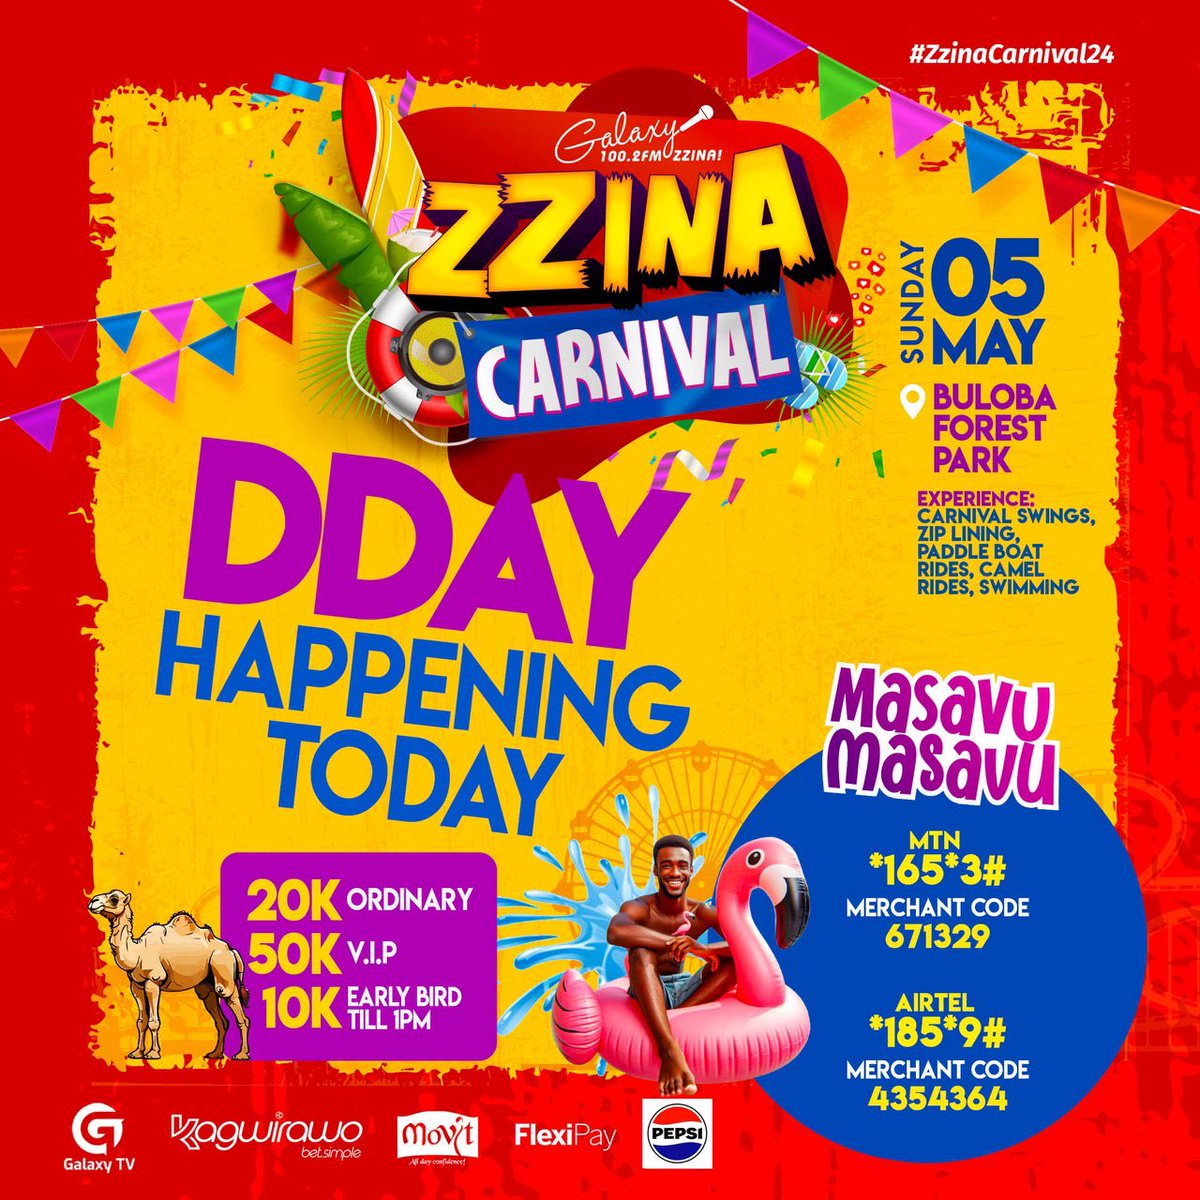 Showering this morning to got #ZzinaCarnival24 was extremely scary. I slipped a bit . I imagined if I had fallen,… these bathroom falls idk .. why are they killing men only ? Why are they happening more frequently ? Is it the tiles or the workmanship ? Let’s meet in Buloba